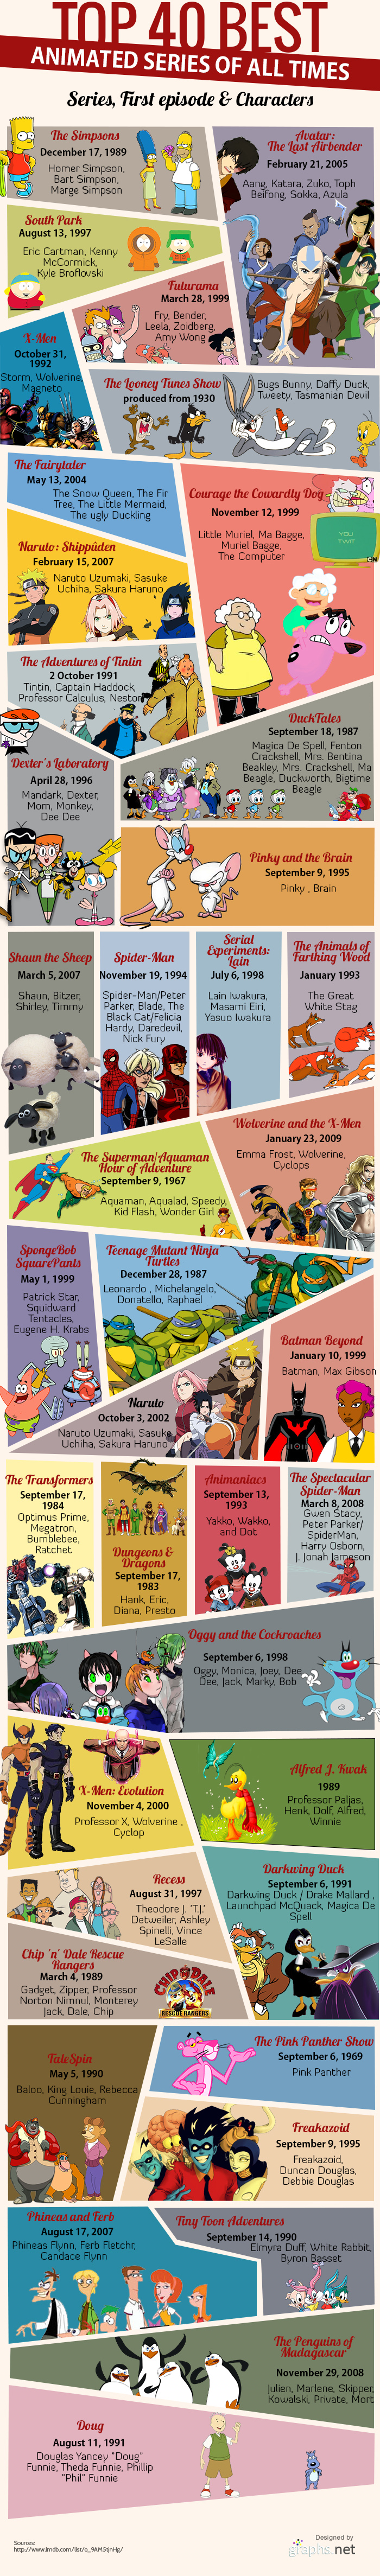 Top 40 BEST ANIMATED SERIES OF ALL TIMES